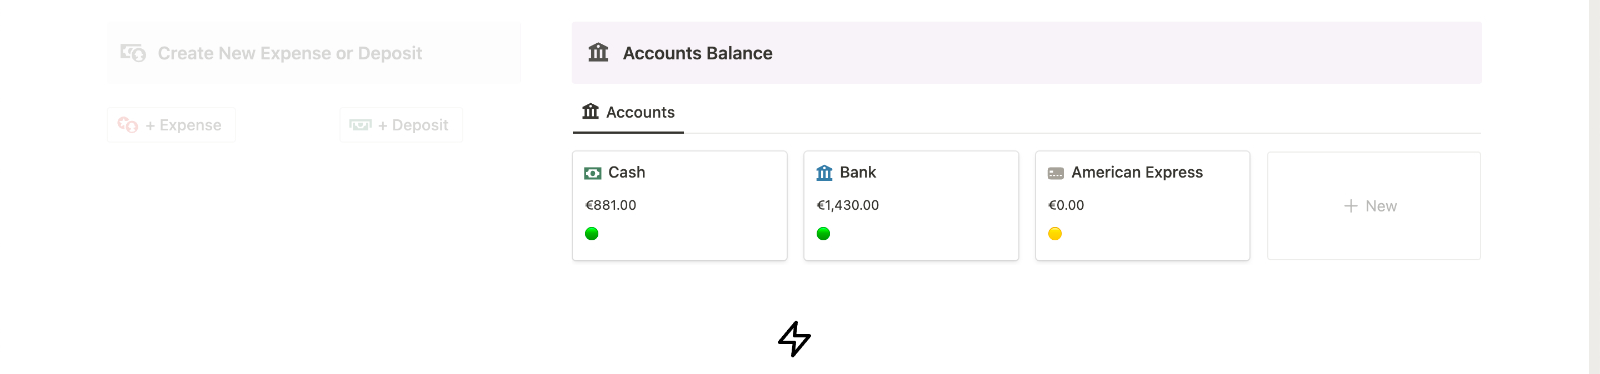 Account Balances in Personal Finance Notion